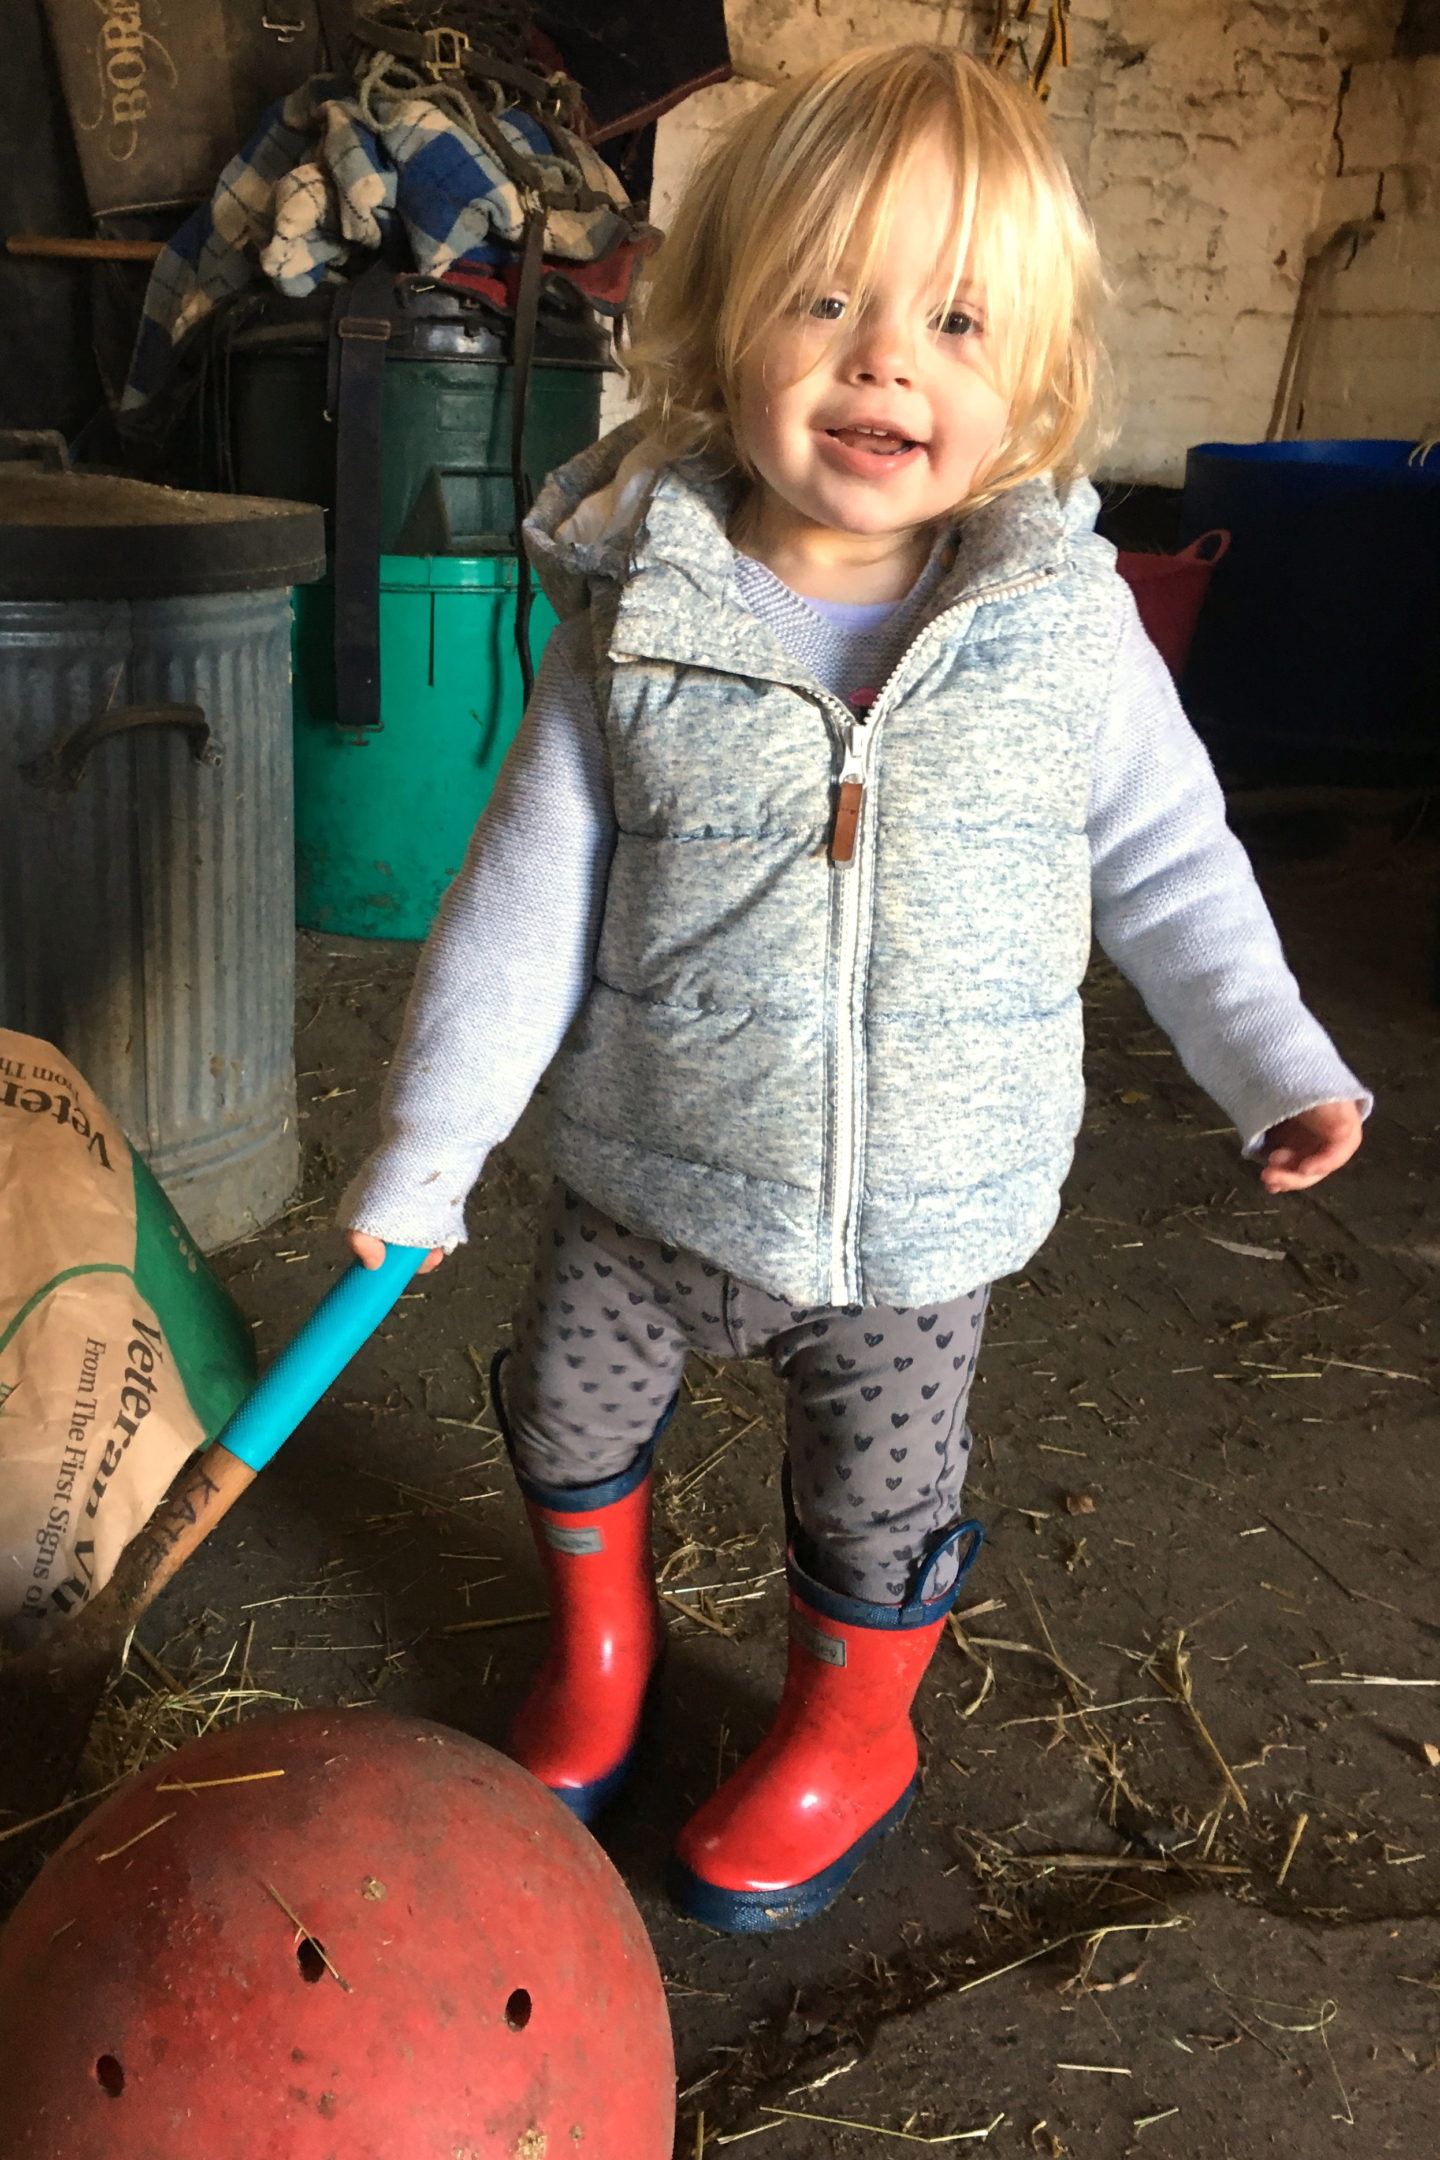 22 months old girl, helping make feeds at the stables